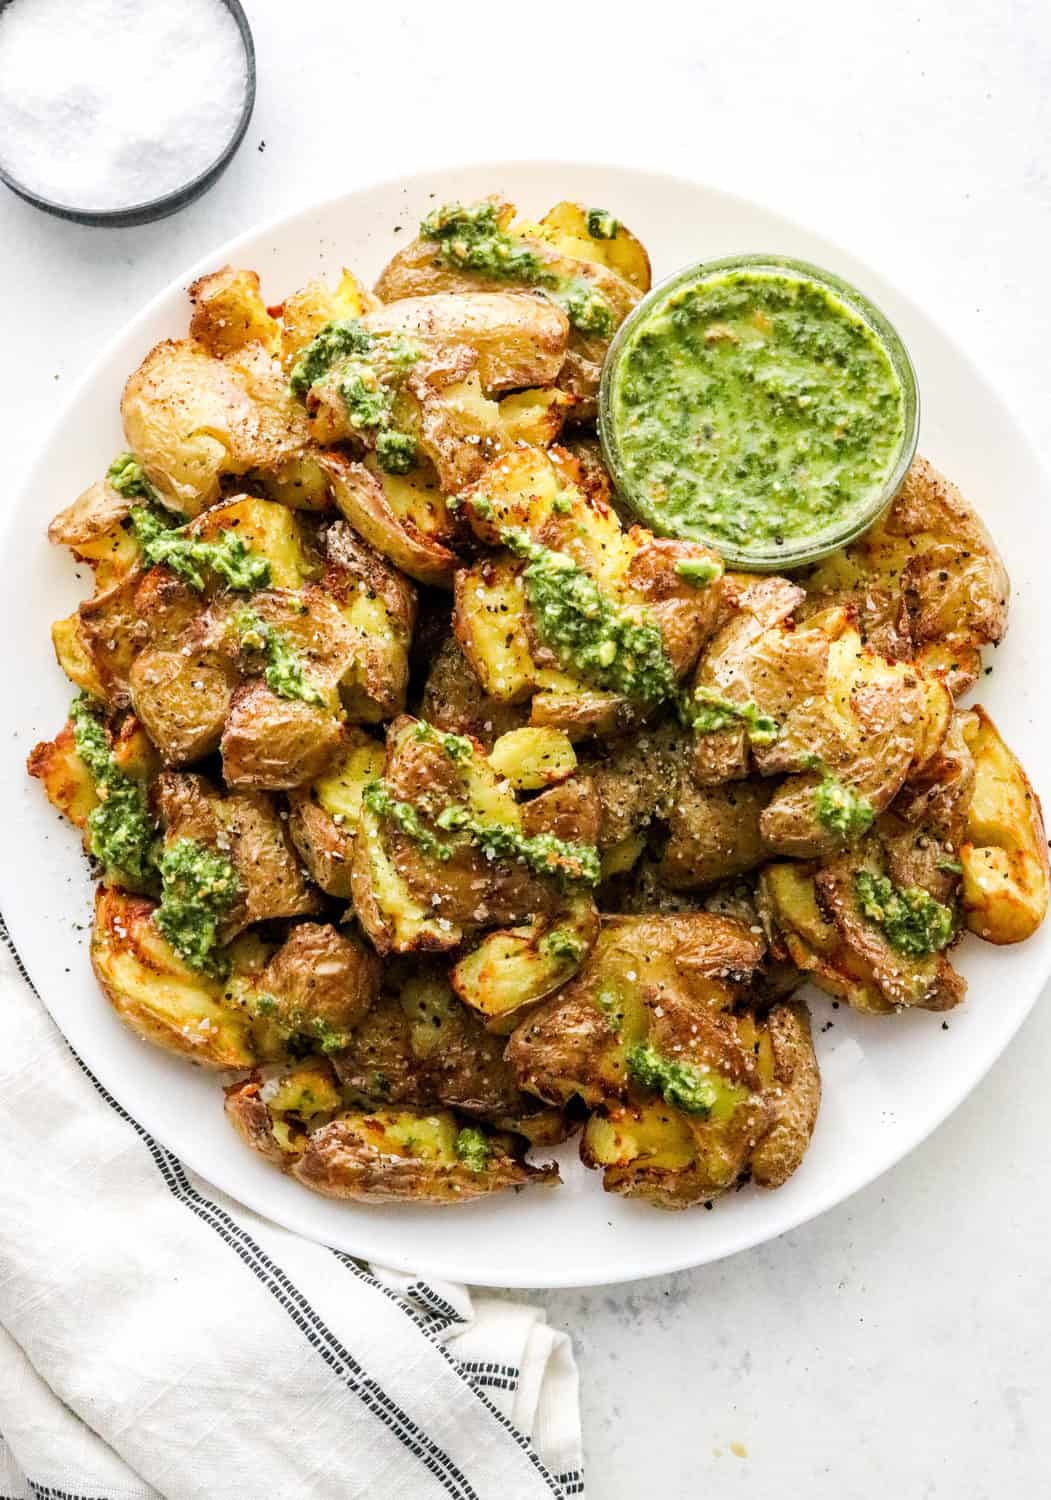 Pile of crispy round potatoes smashed on a round white plate drizzled with green sauce with a white and black striped linen next to it on a white surface. 